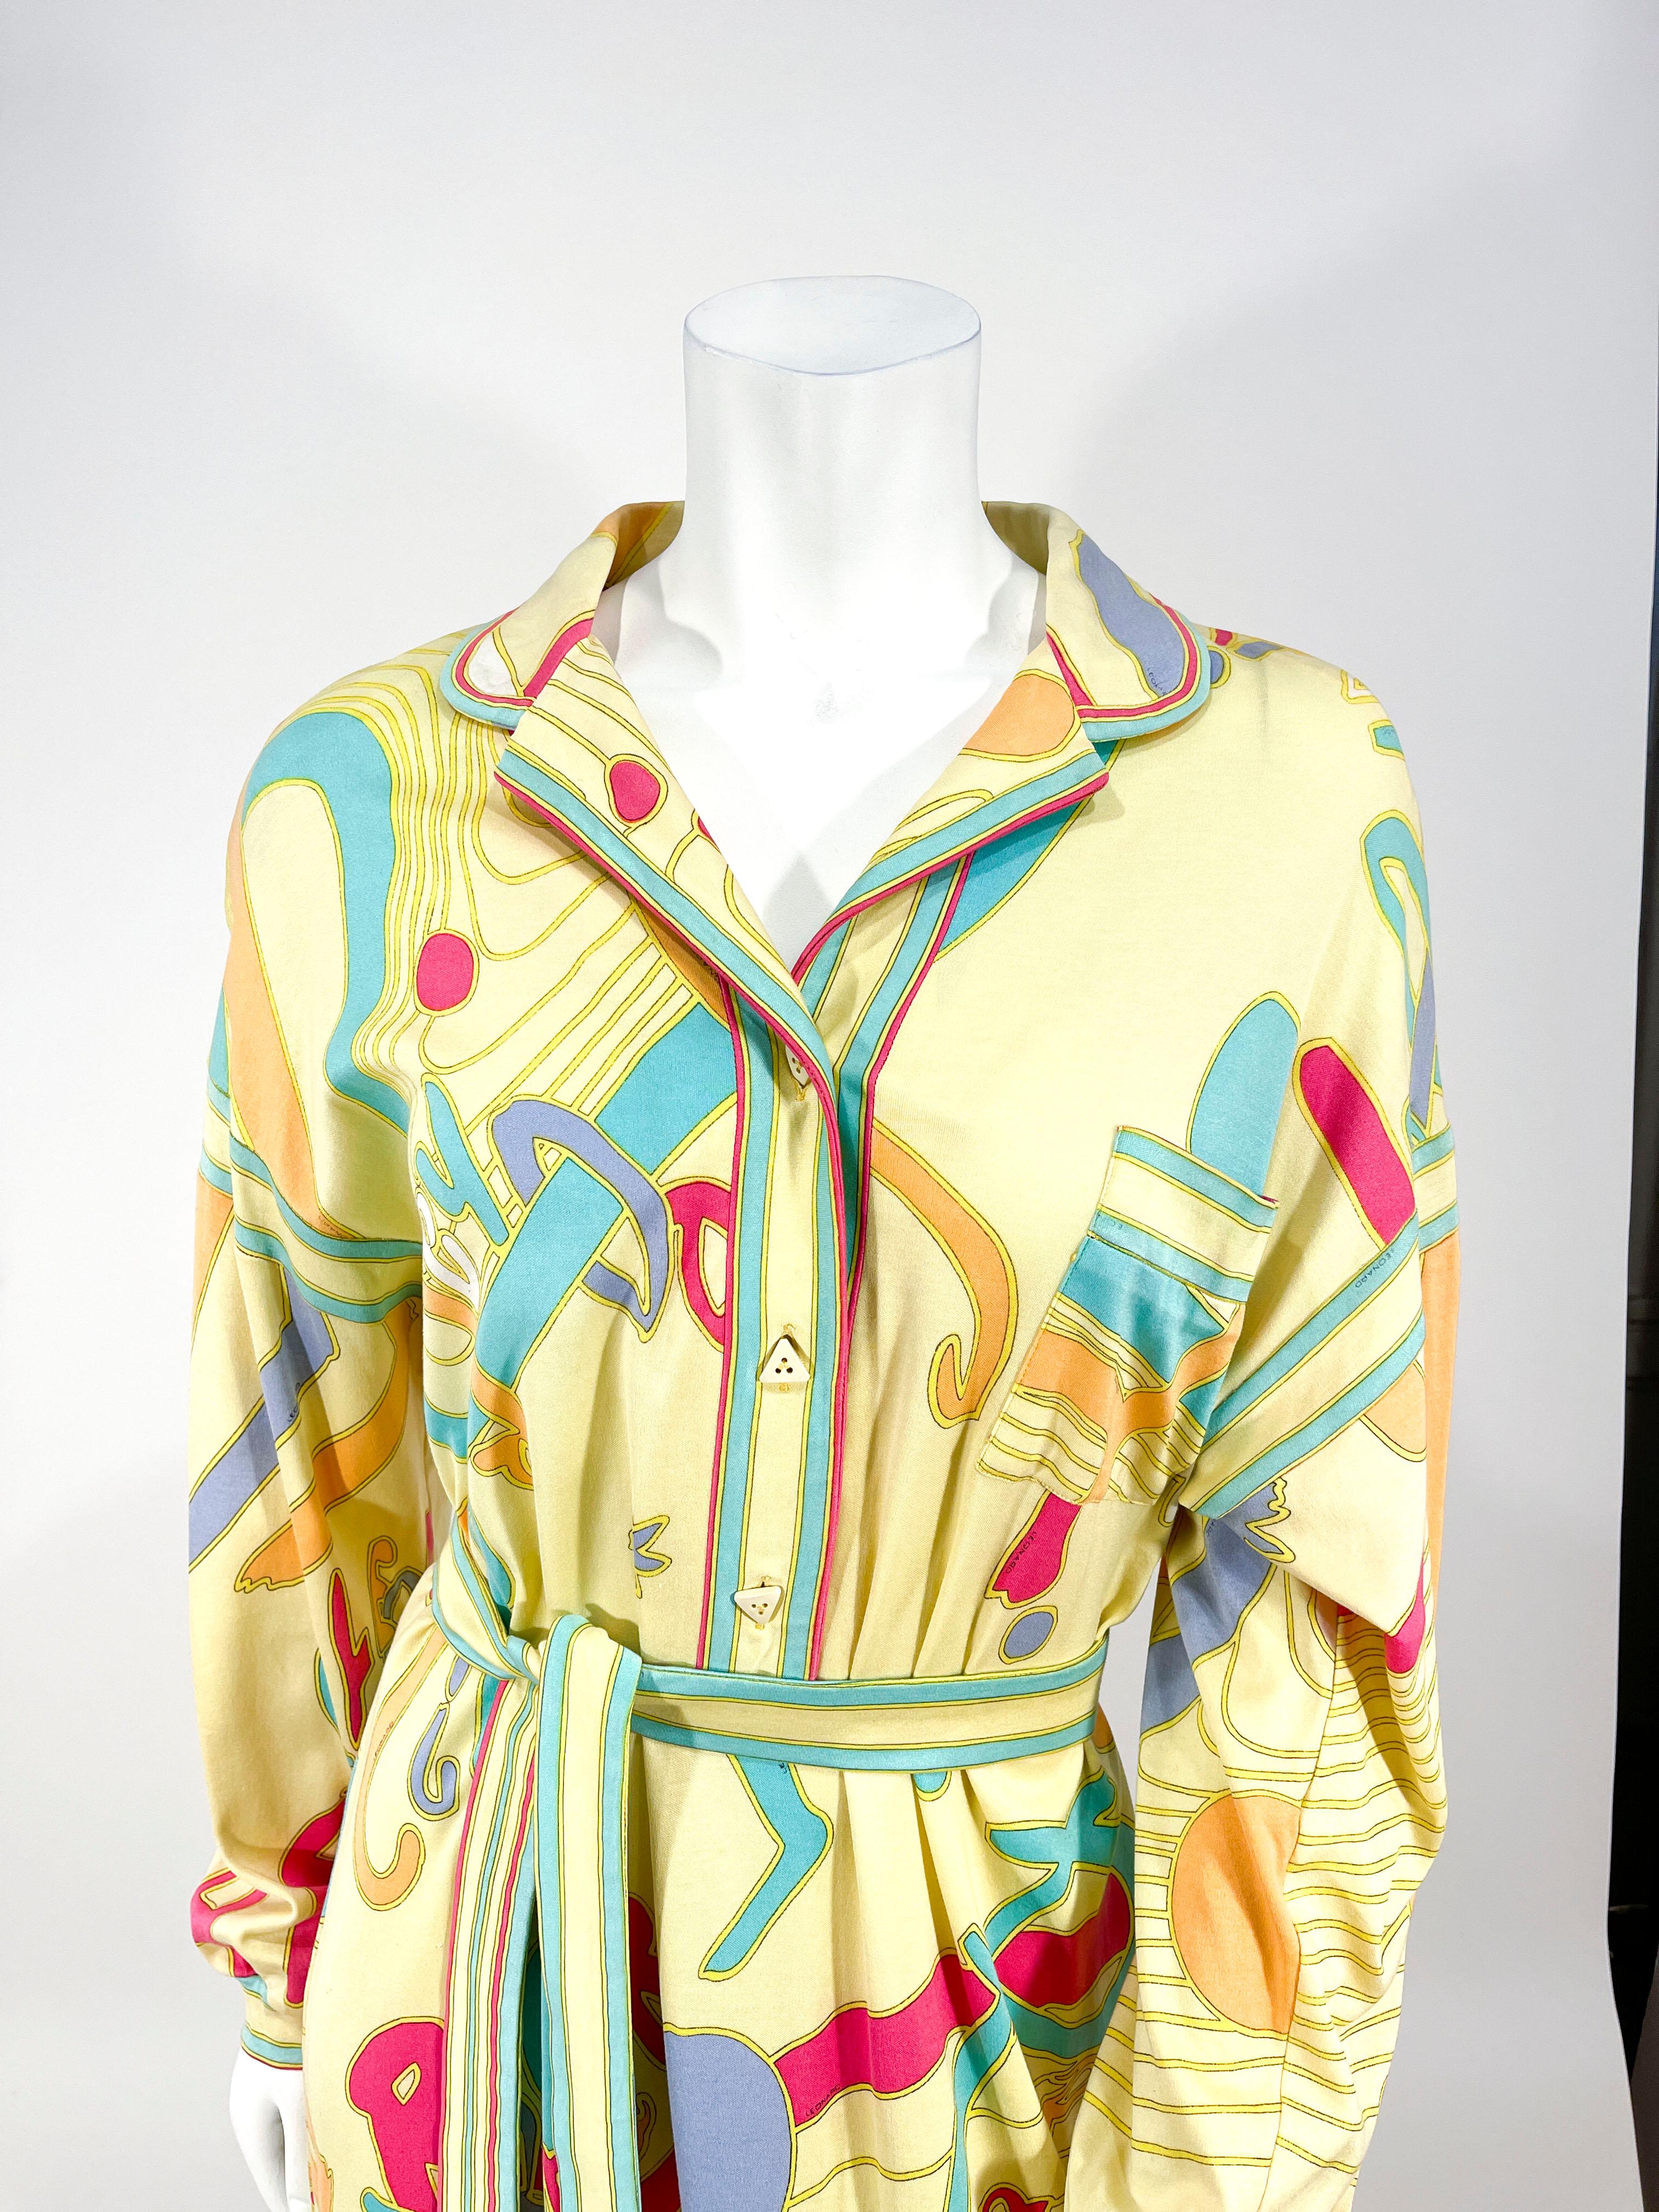 Late 1970s to early 1980s Leonard printed jersey dress. the print features pastels on shades of yellow with a typography motif. The silhouette features a button up neckline with speciality buttons, full cuffed sleeves, light shoulder padding, and a